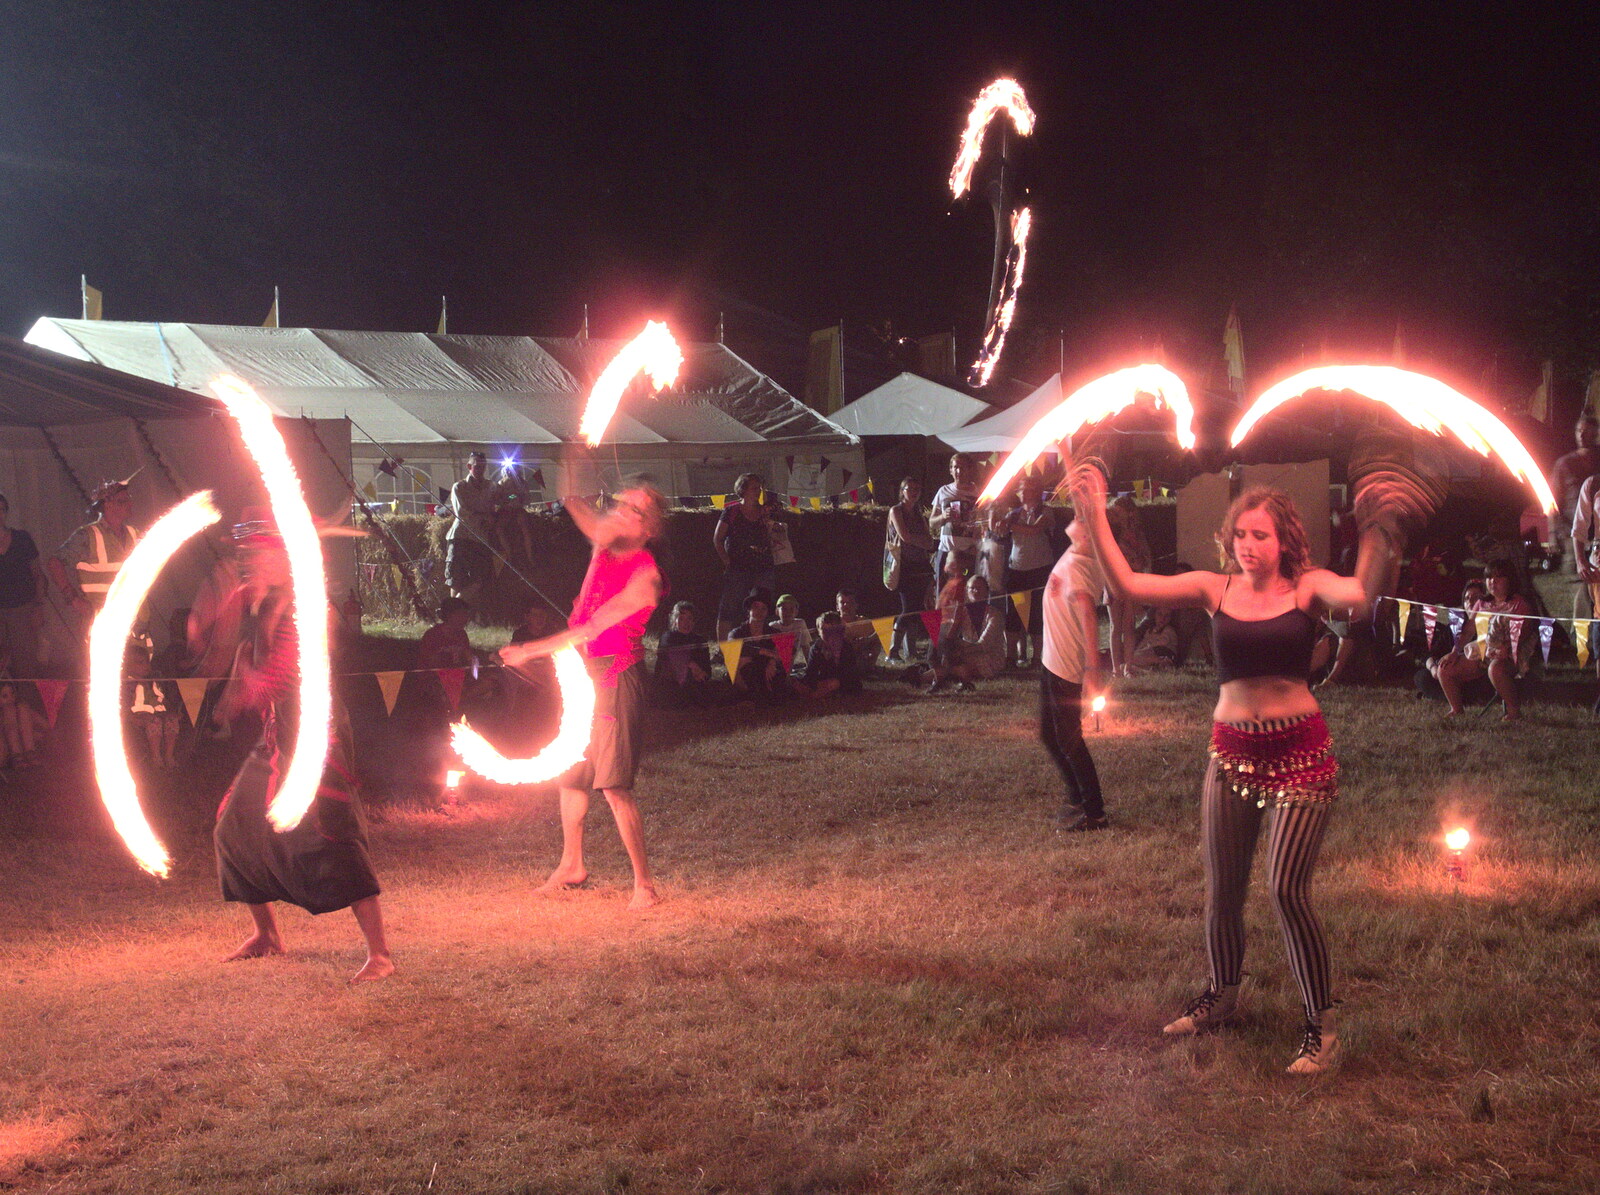 We catch the end of a fire show from Latitude Festival, Henham Park, Southwold, Suffolk - 17th July 2014